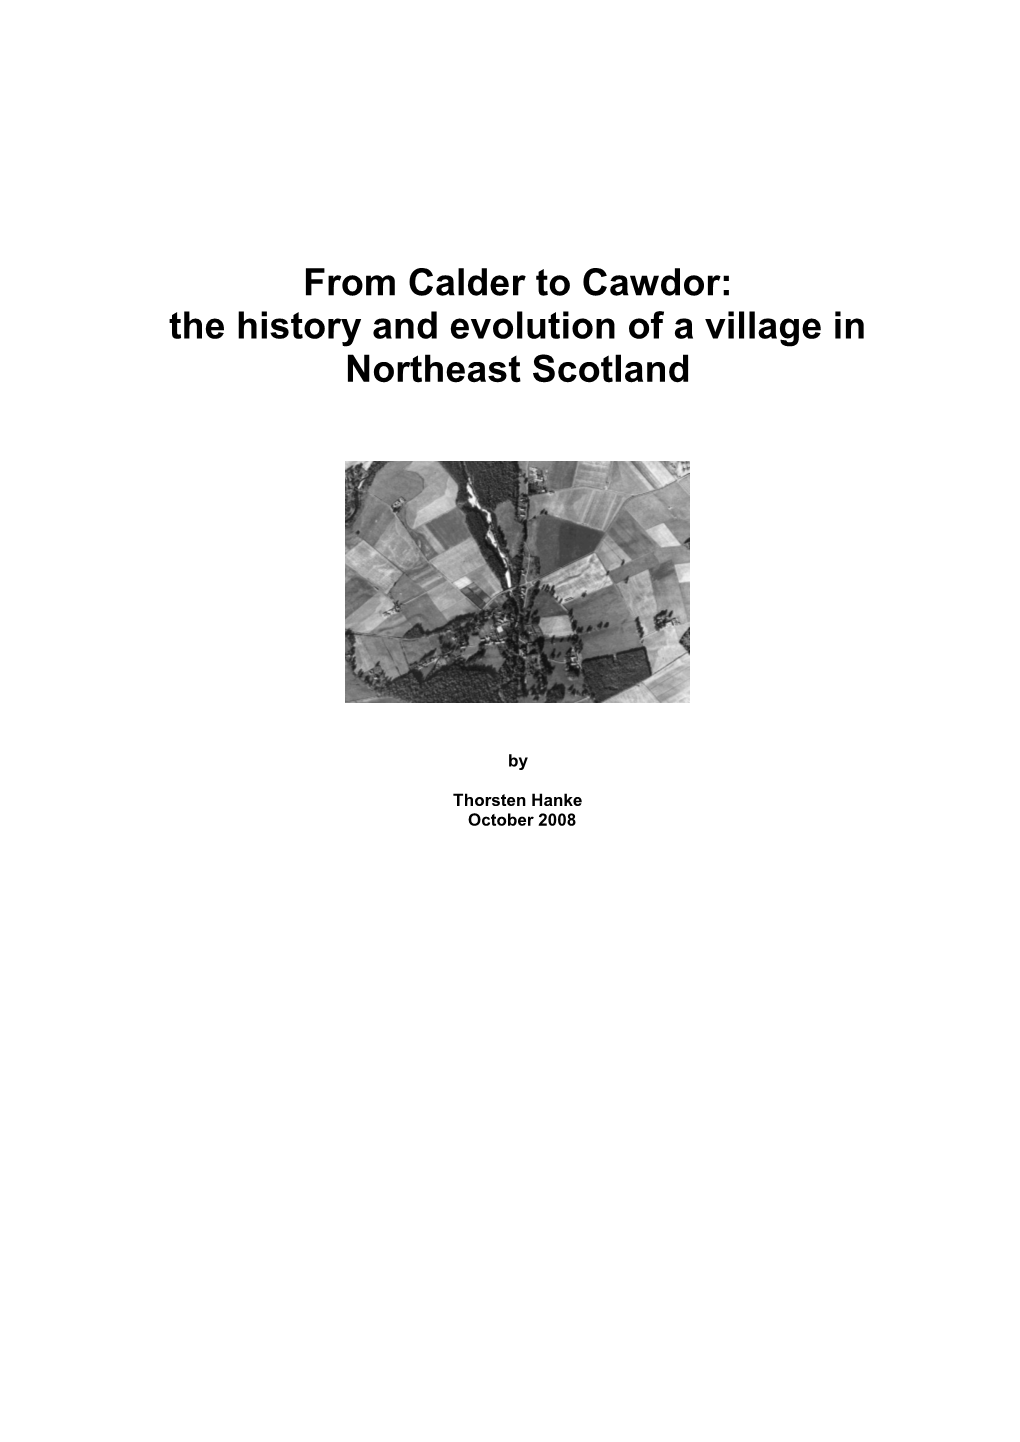 From Calder to Cawdor: the History and Evolution of a Village in Northeast Scotland